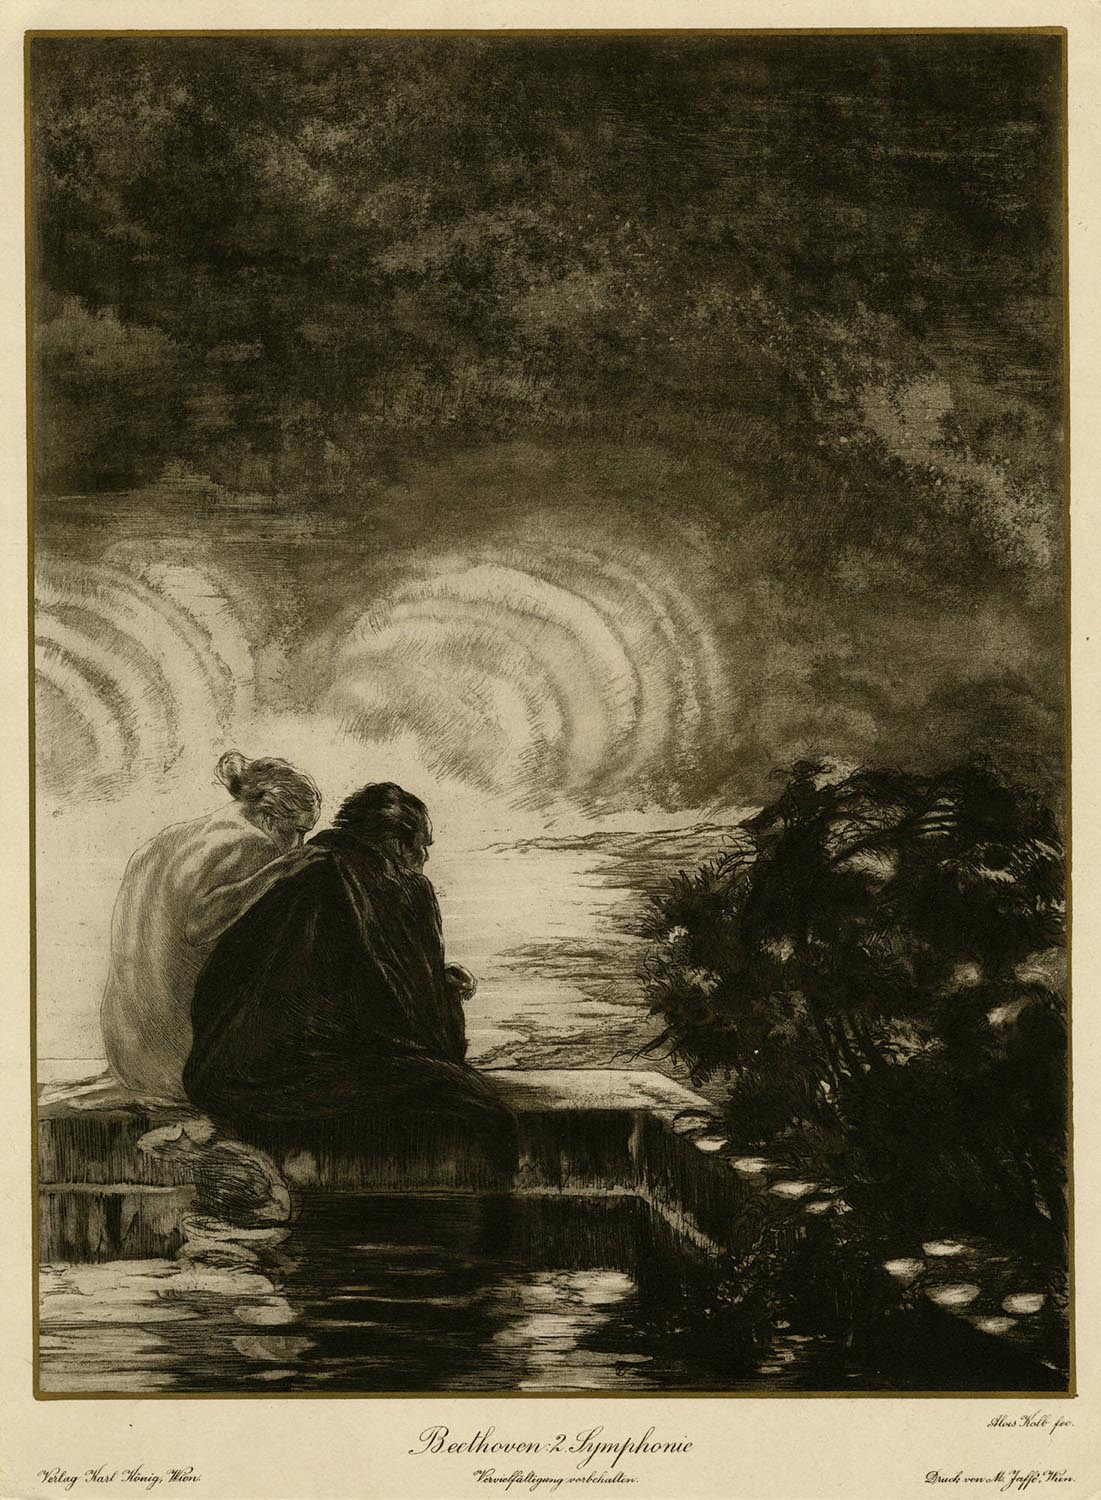 Beethoven sitting and looking sorrowfully out over the water. He is comforted by a spirit-like figure to his left; the spirit’s hand is on Beethoven’s back.  